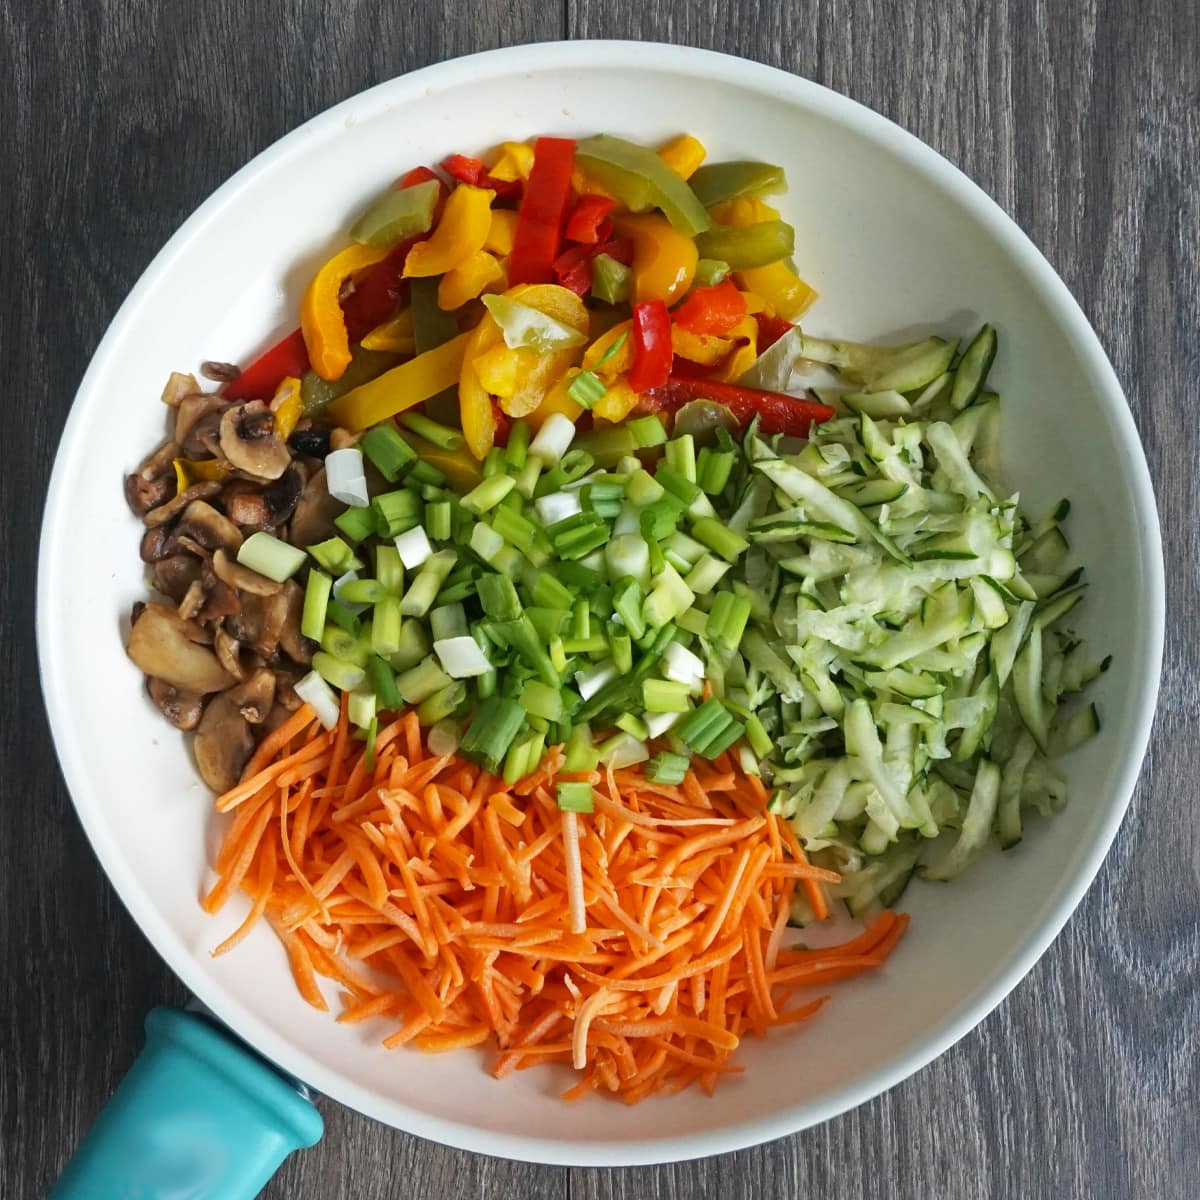 Skillet with fresh shredded veggies: zucchini, carrots, mushrooms, bell peppers and green onions